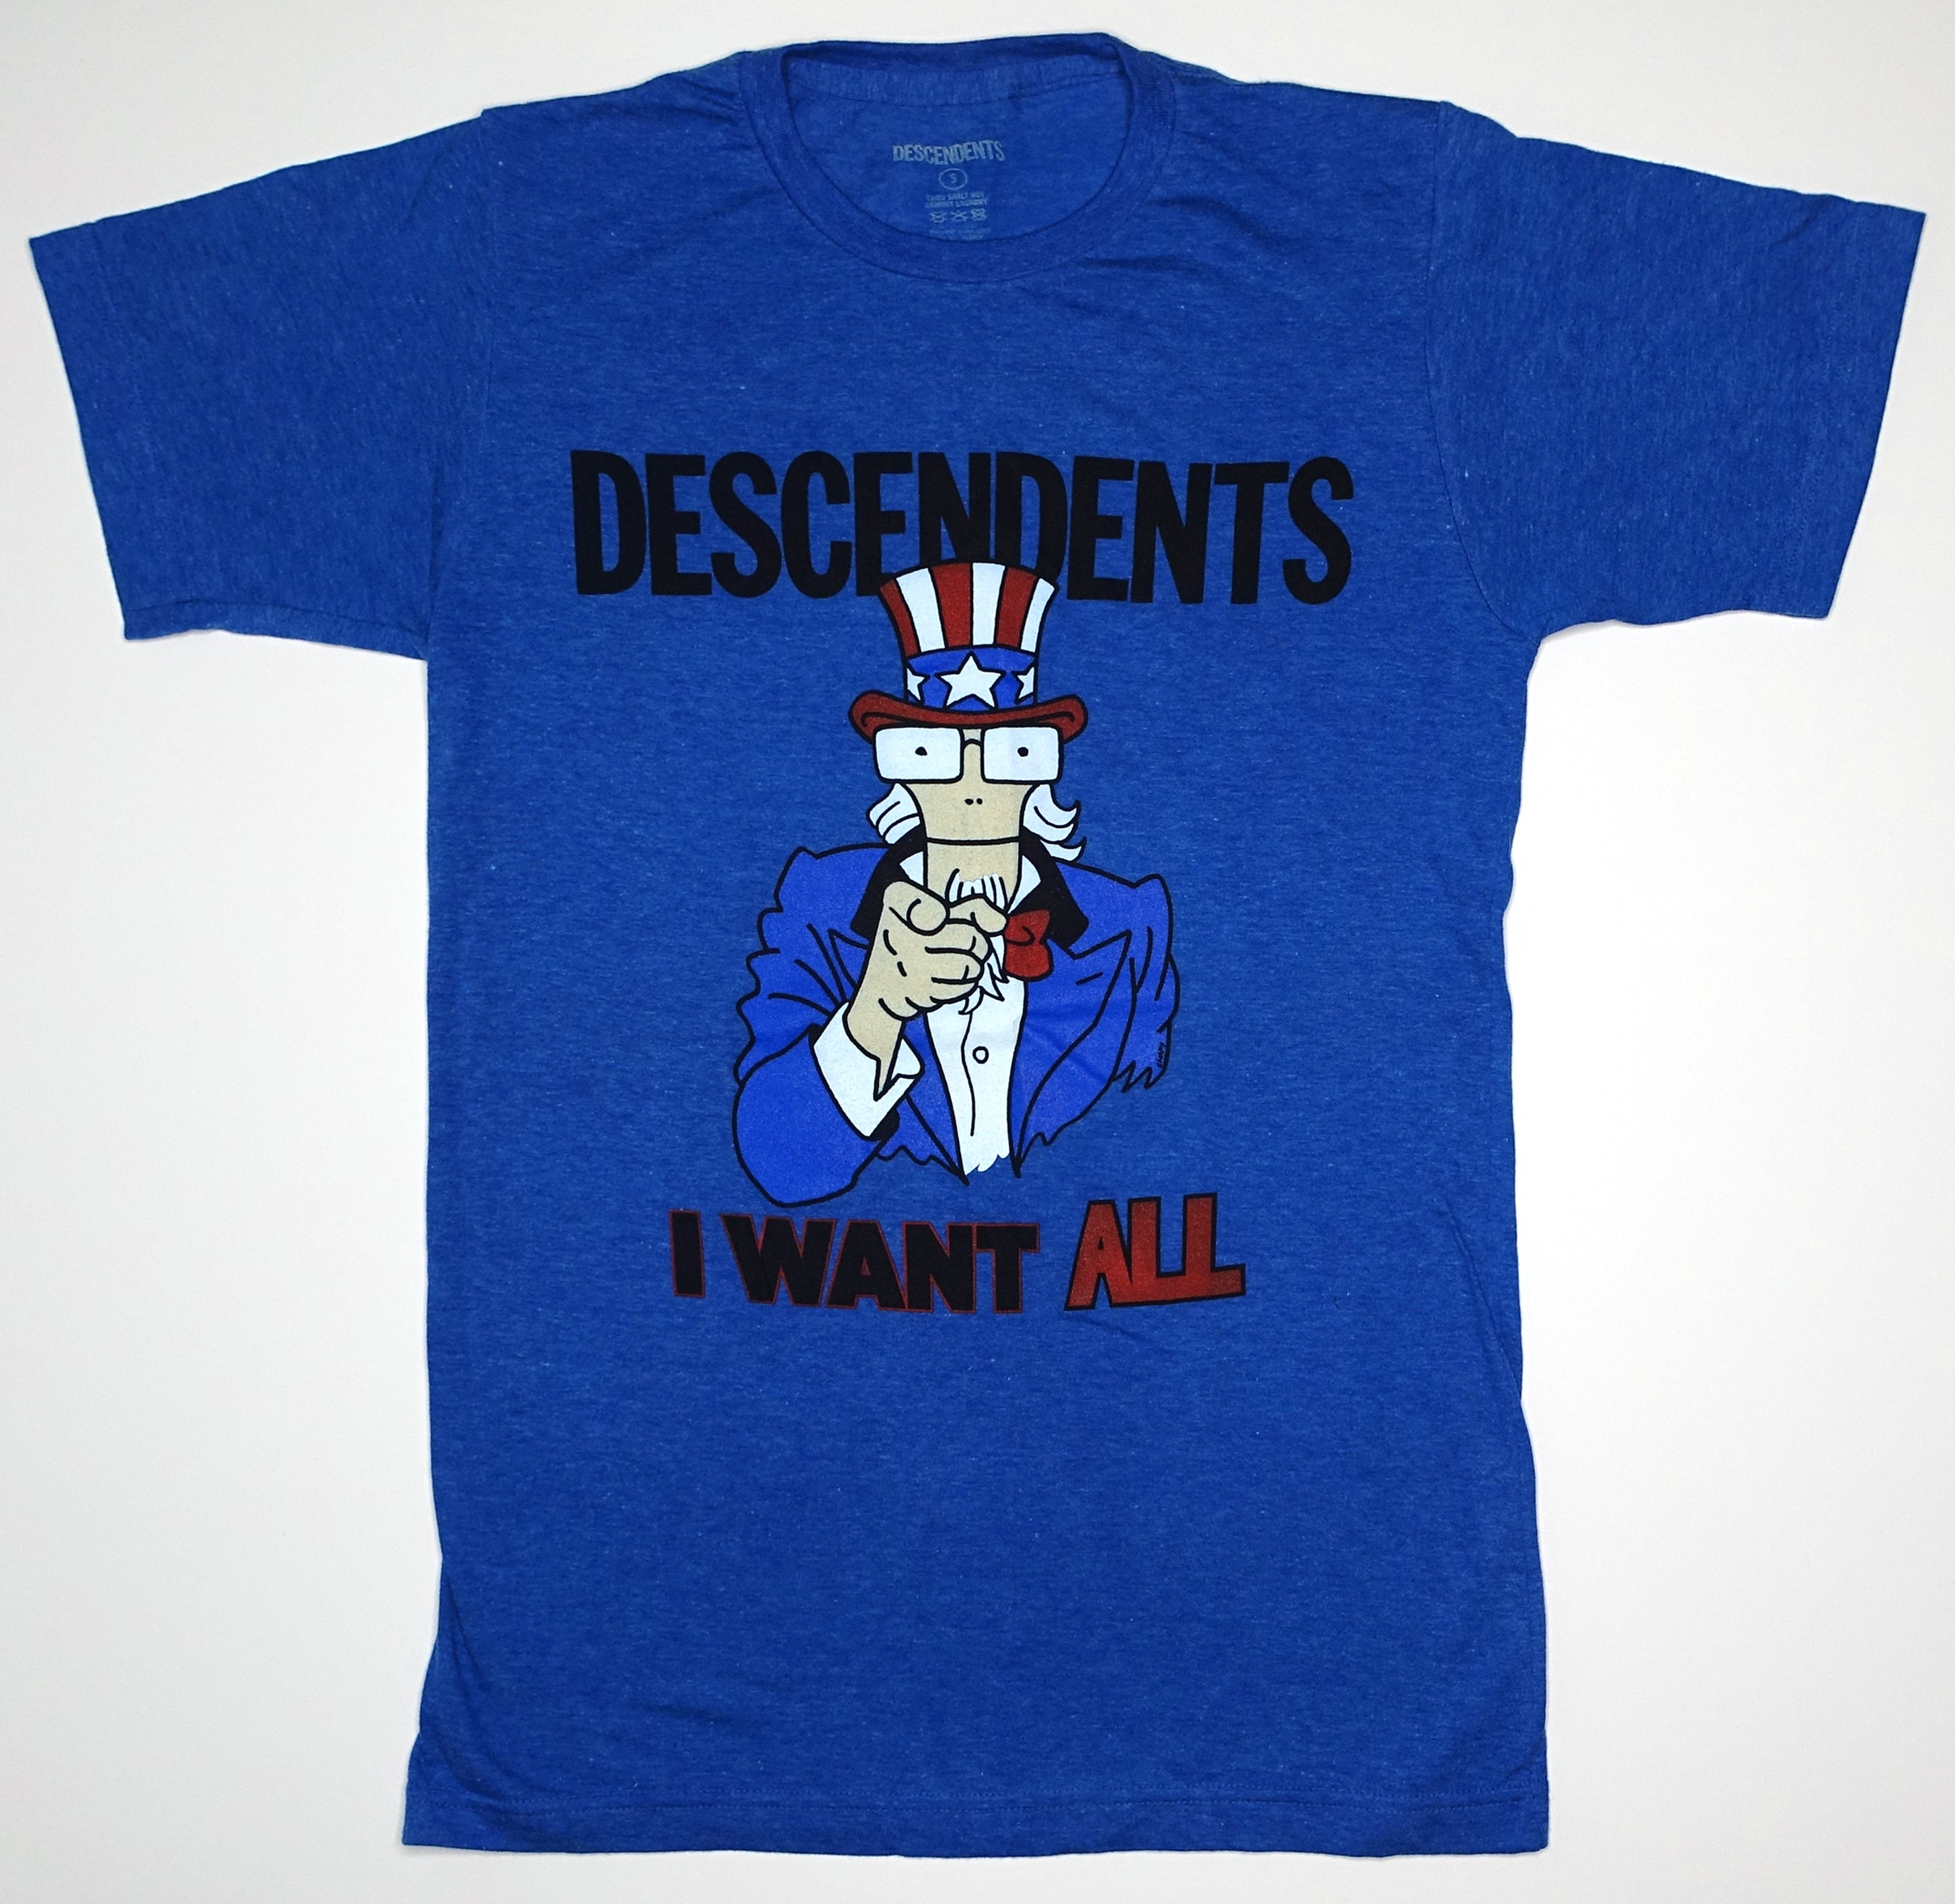 Descendents - I Want ALL Blue Shirt Size Small